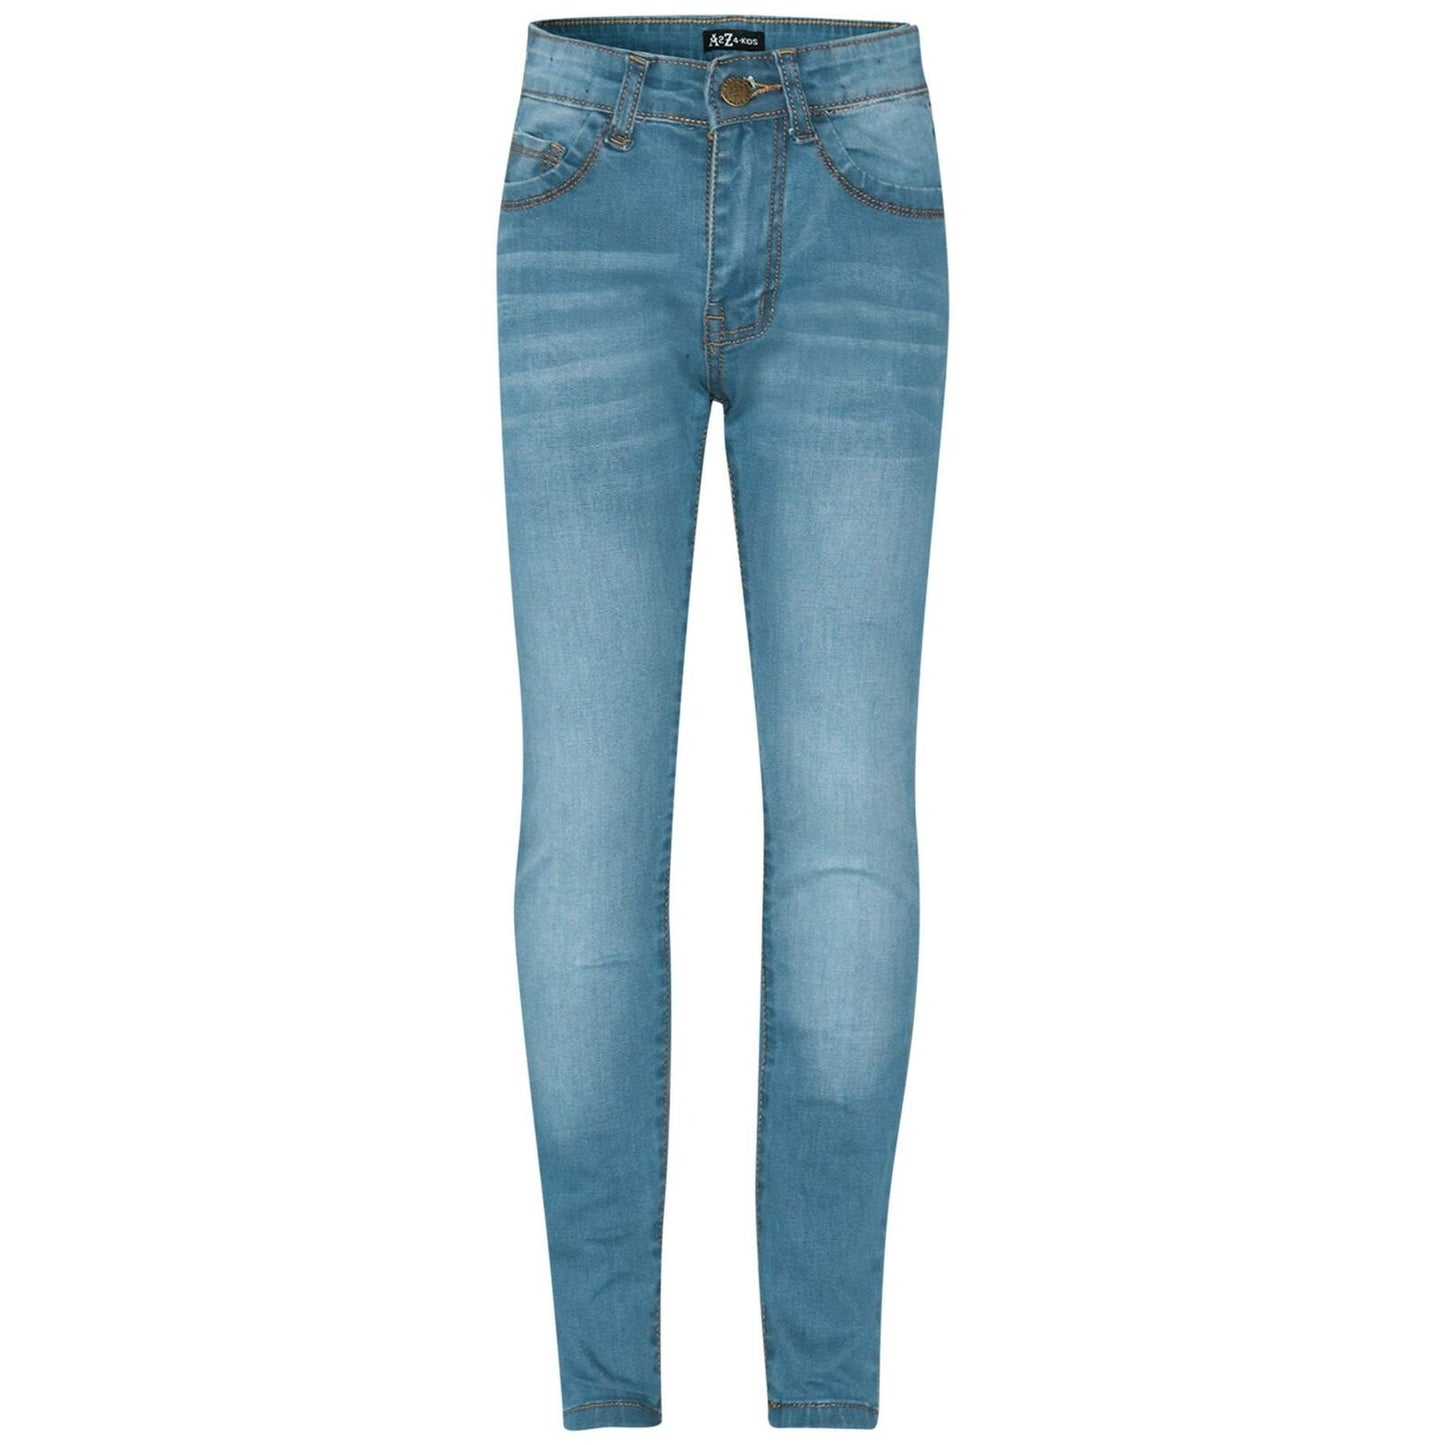 Girls Skinny Fit Light Blue  Denim Jeans. Available Ages 5-14.